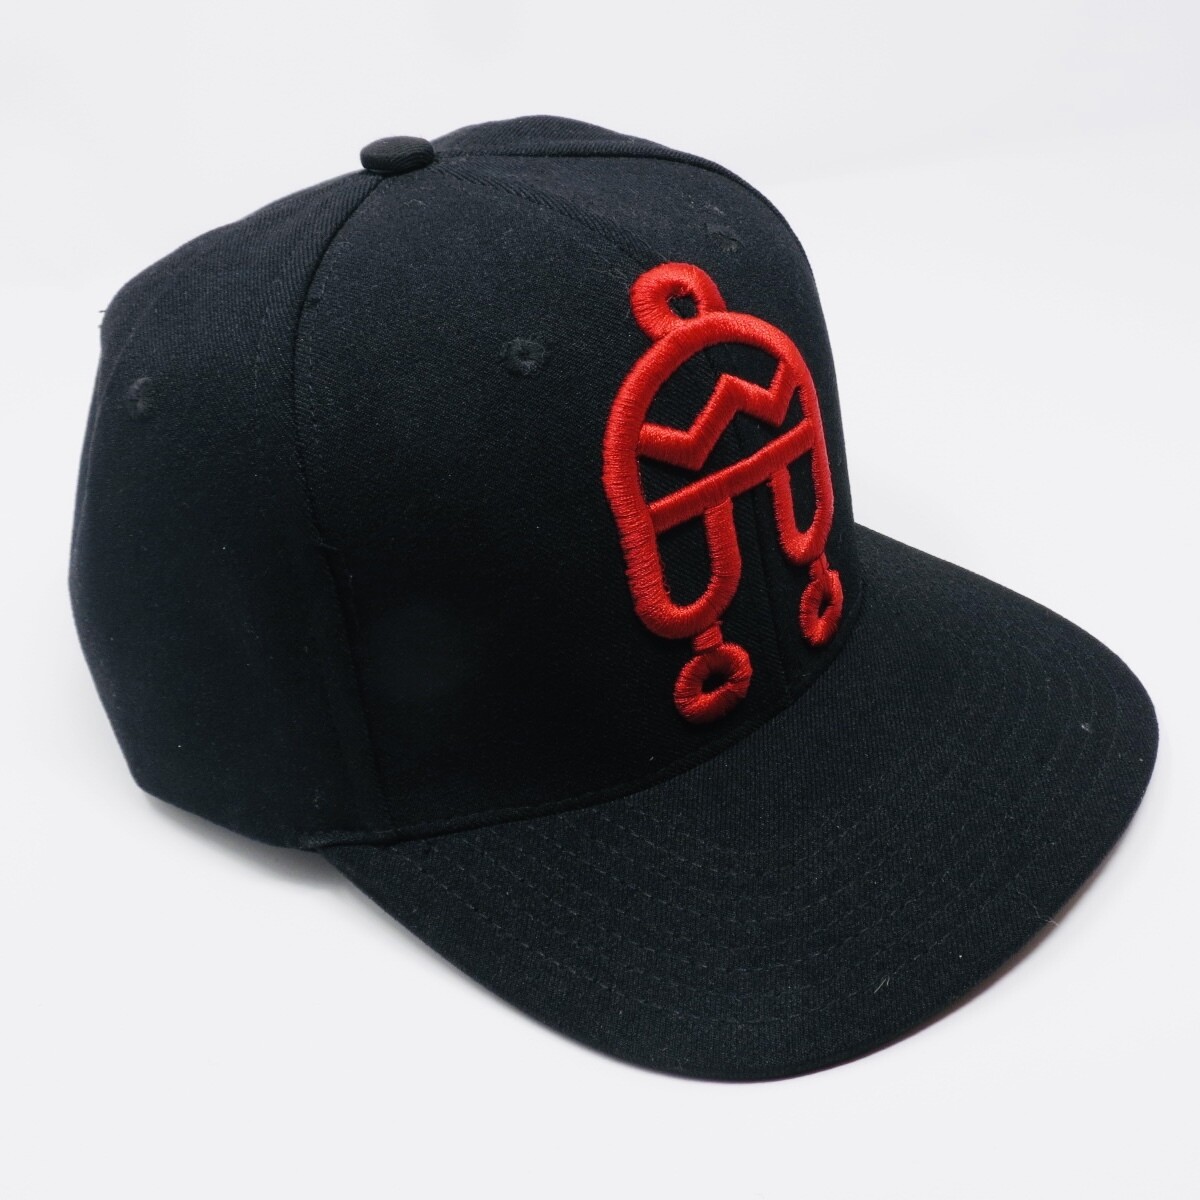 Peruvian Brothers Hat - Black Hat with Red Chullo Logo